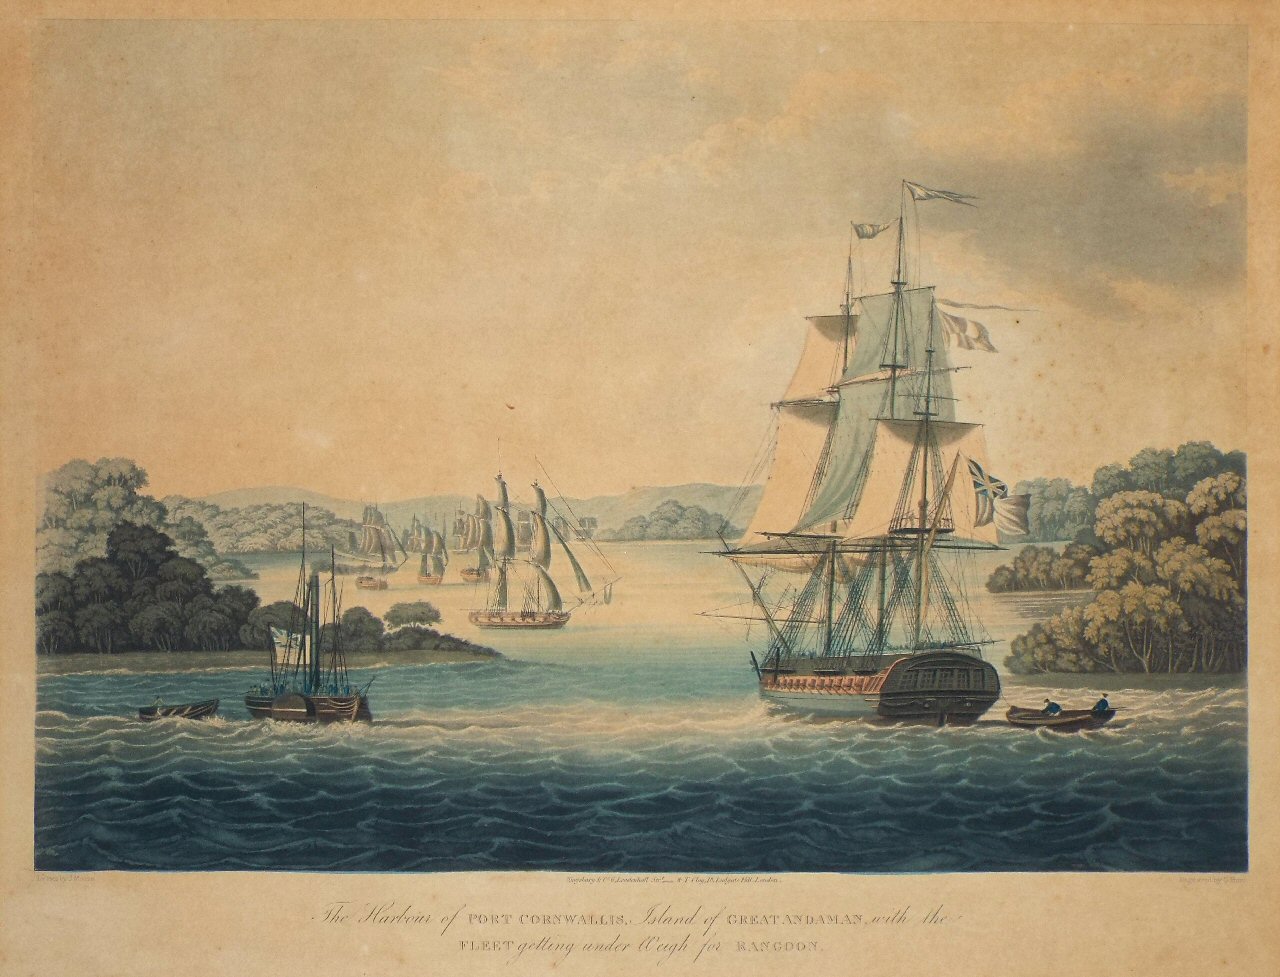 Aquatint - The Harbour of Port Cornwallis, Island of Great Andaman, with the Fleet getting under Weigh for Rangoon. - Hunt